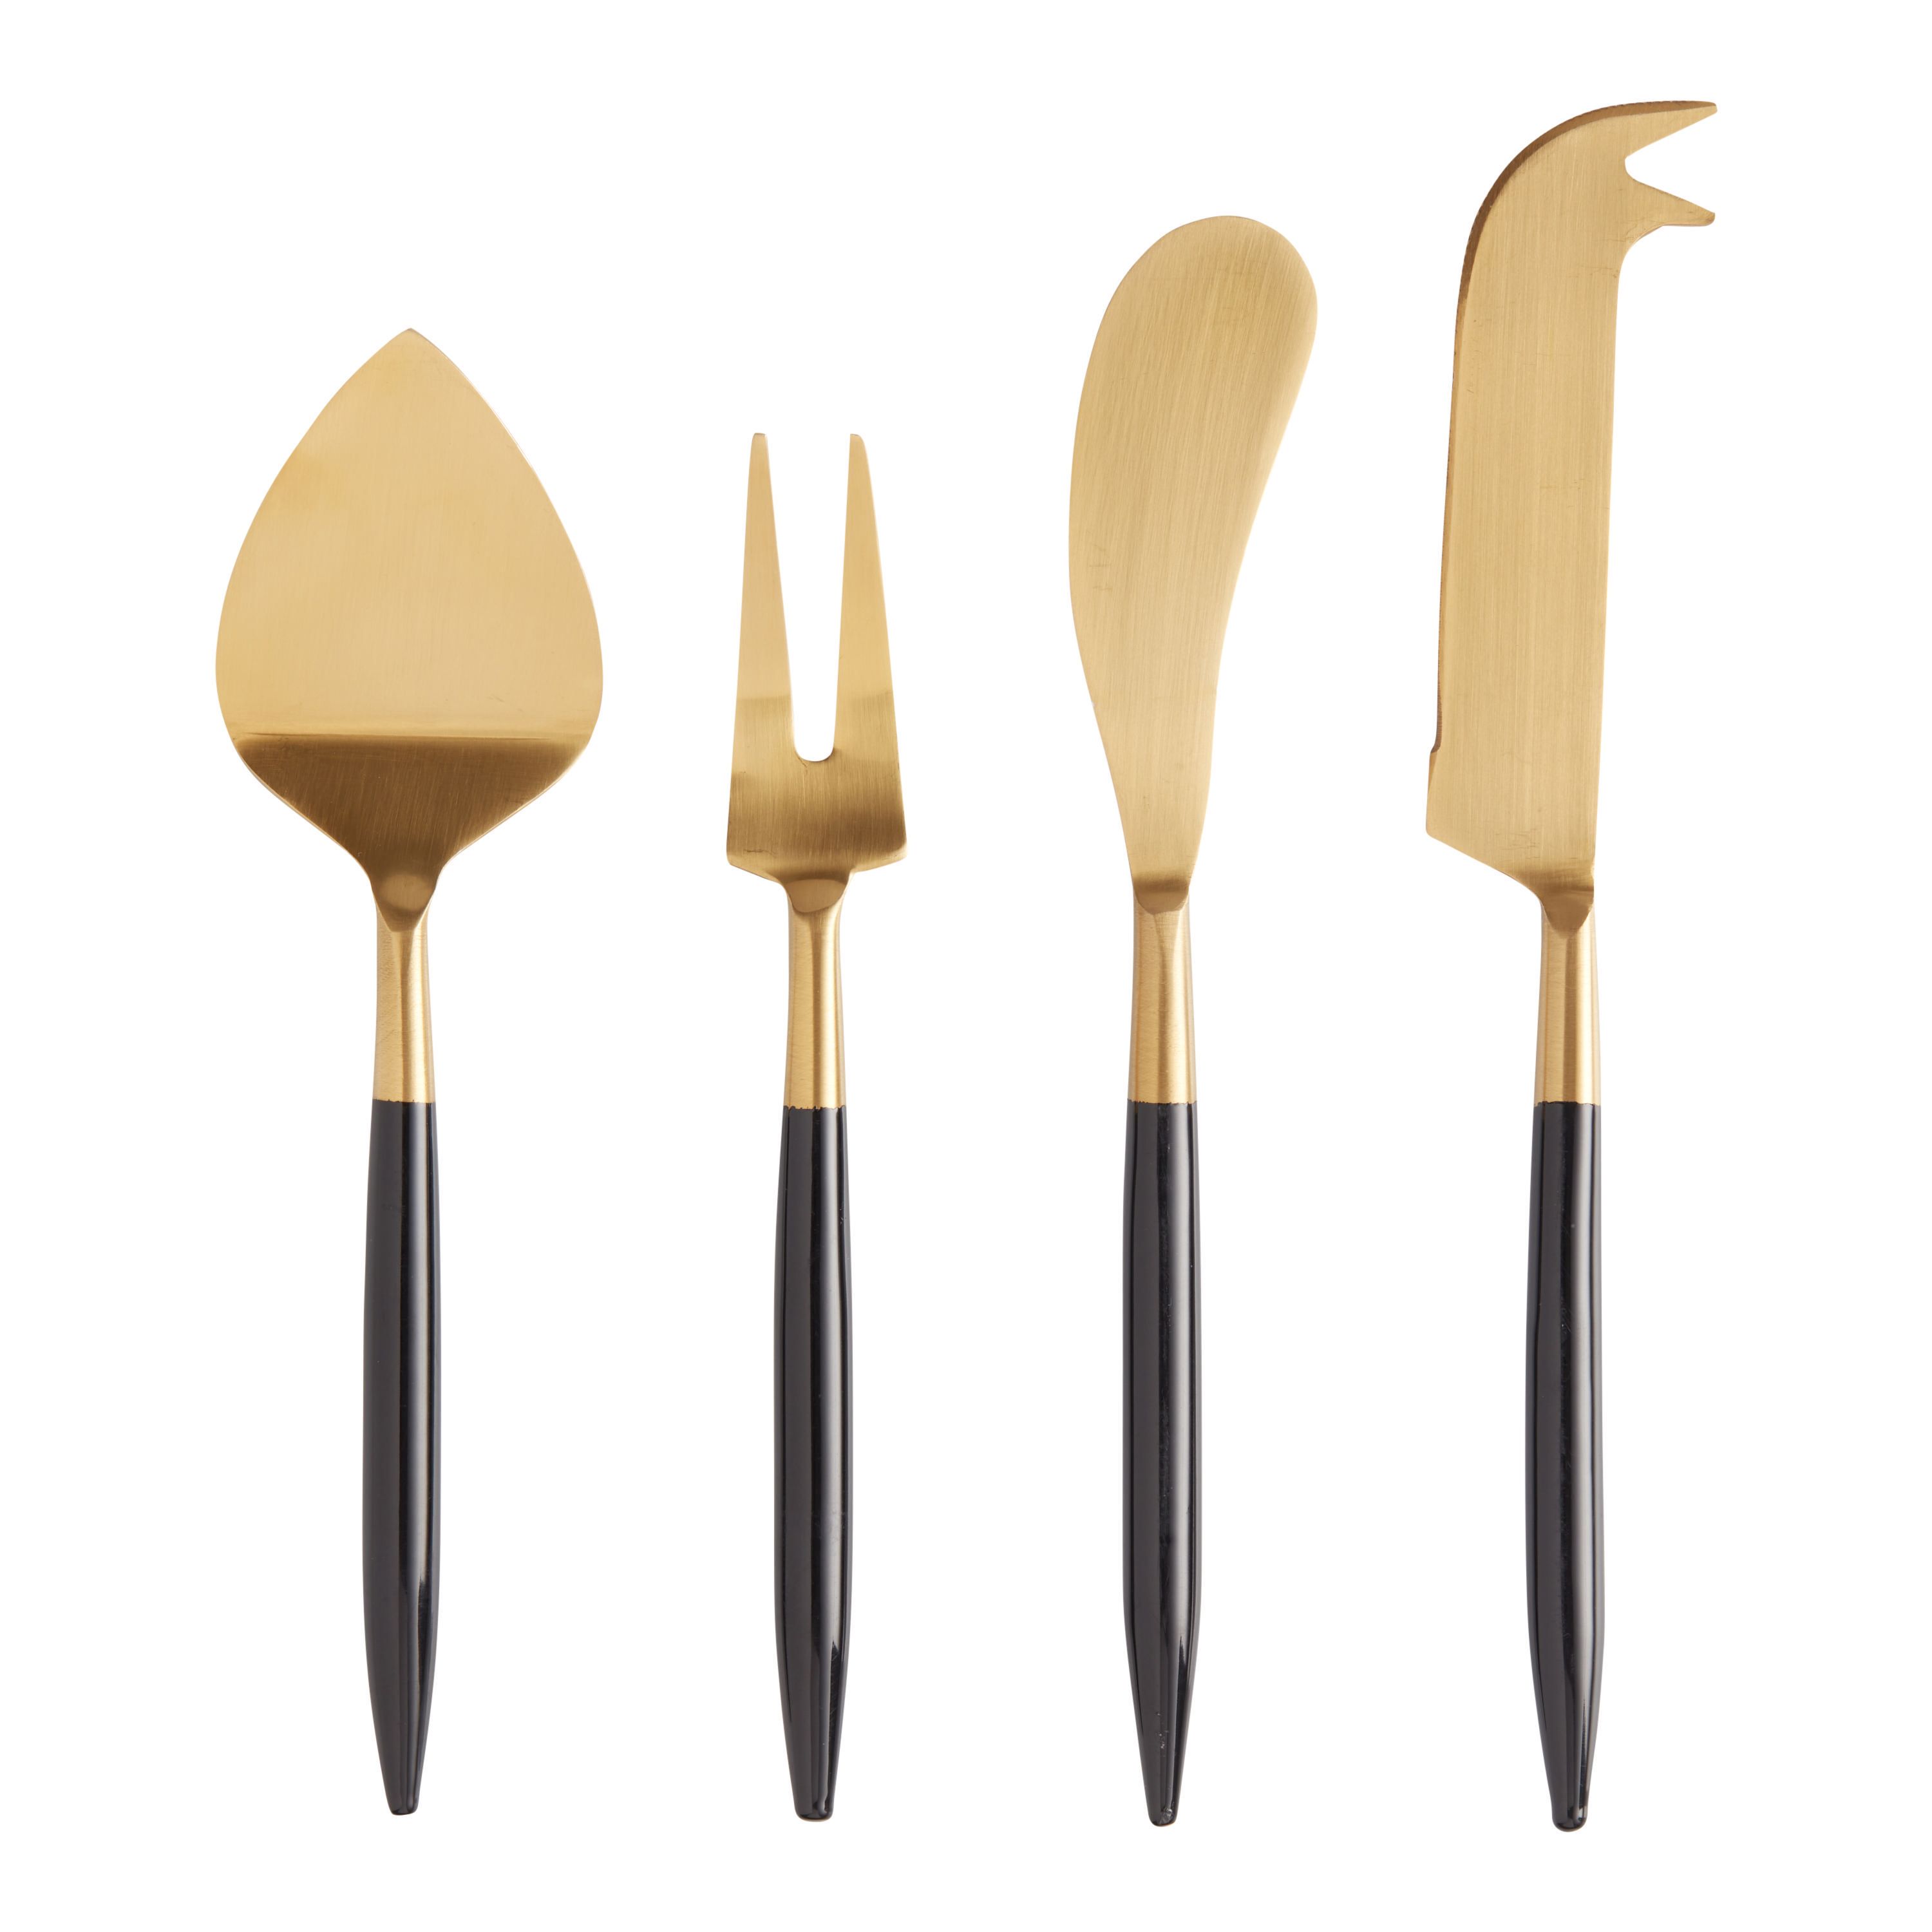 Shay Black And Gold Cheese Knives 4 Piece Set | World Market